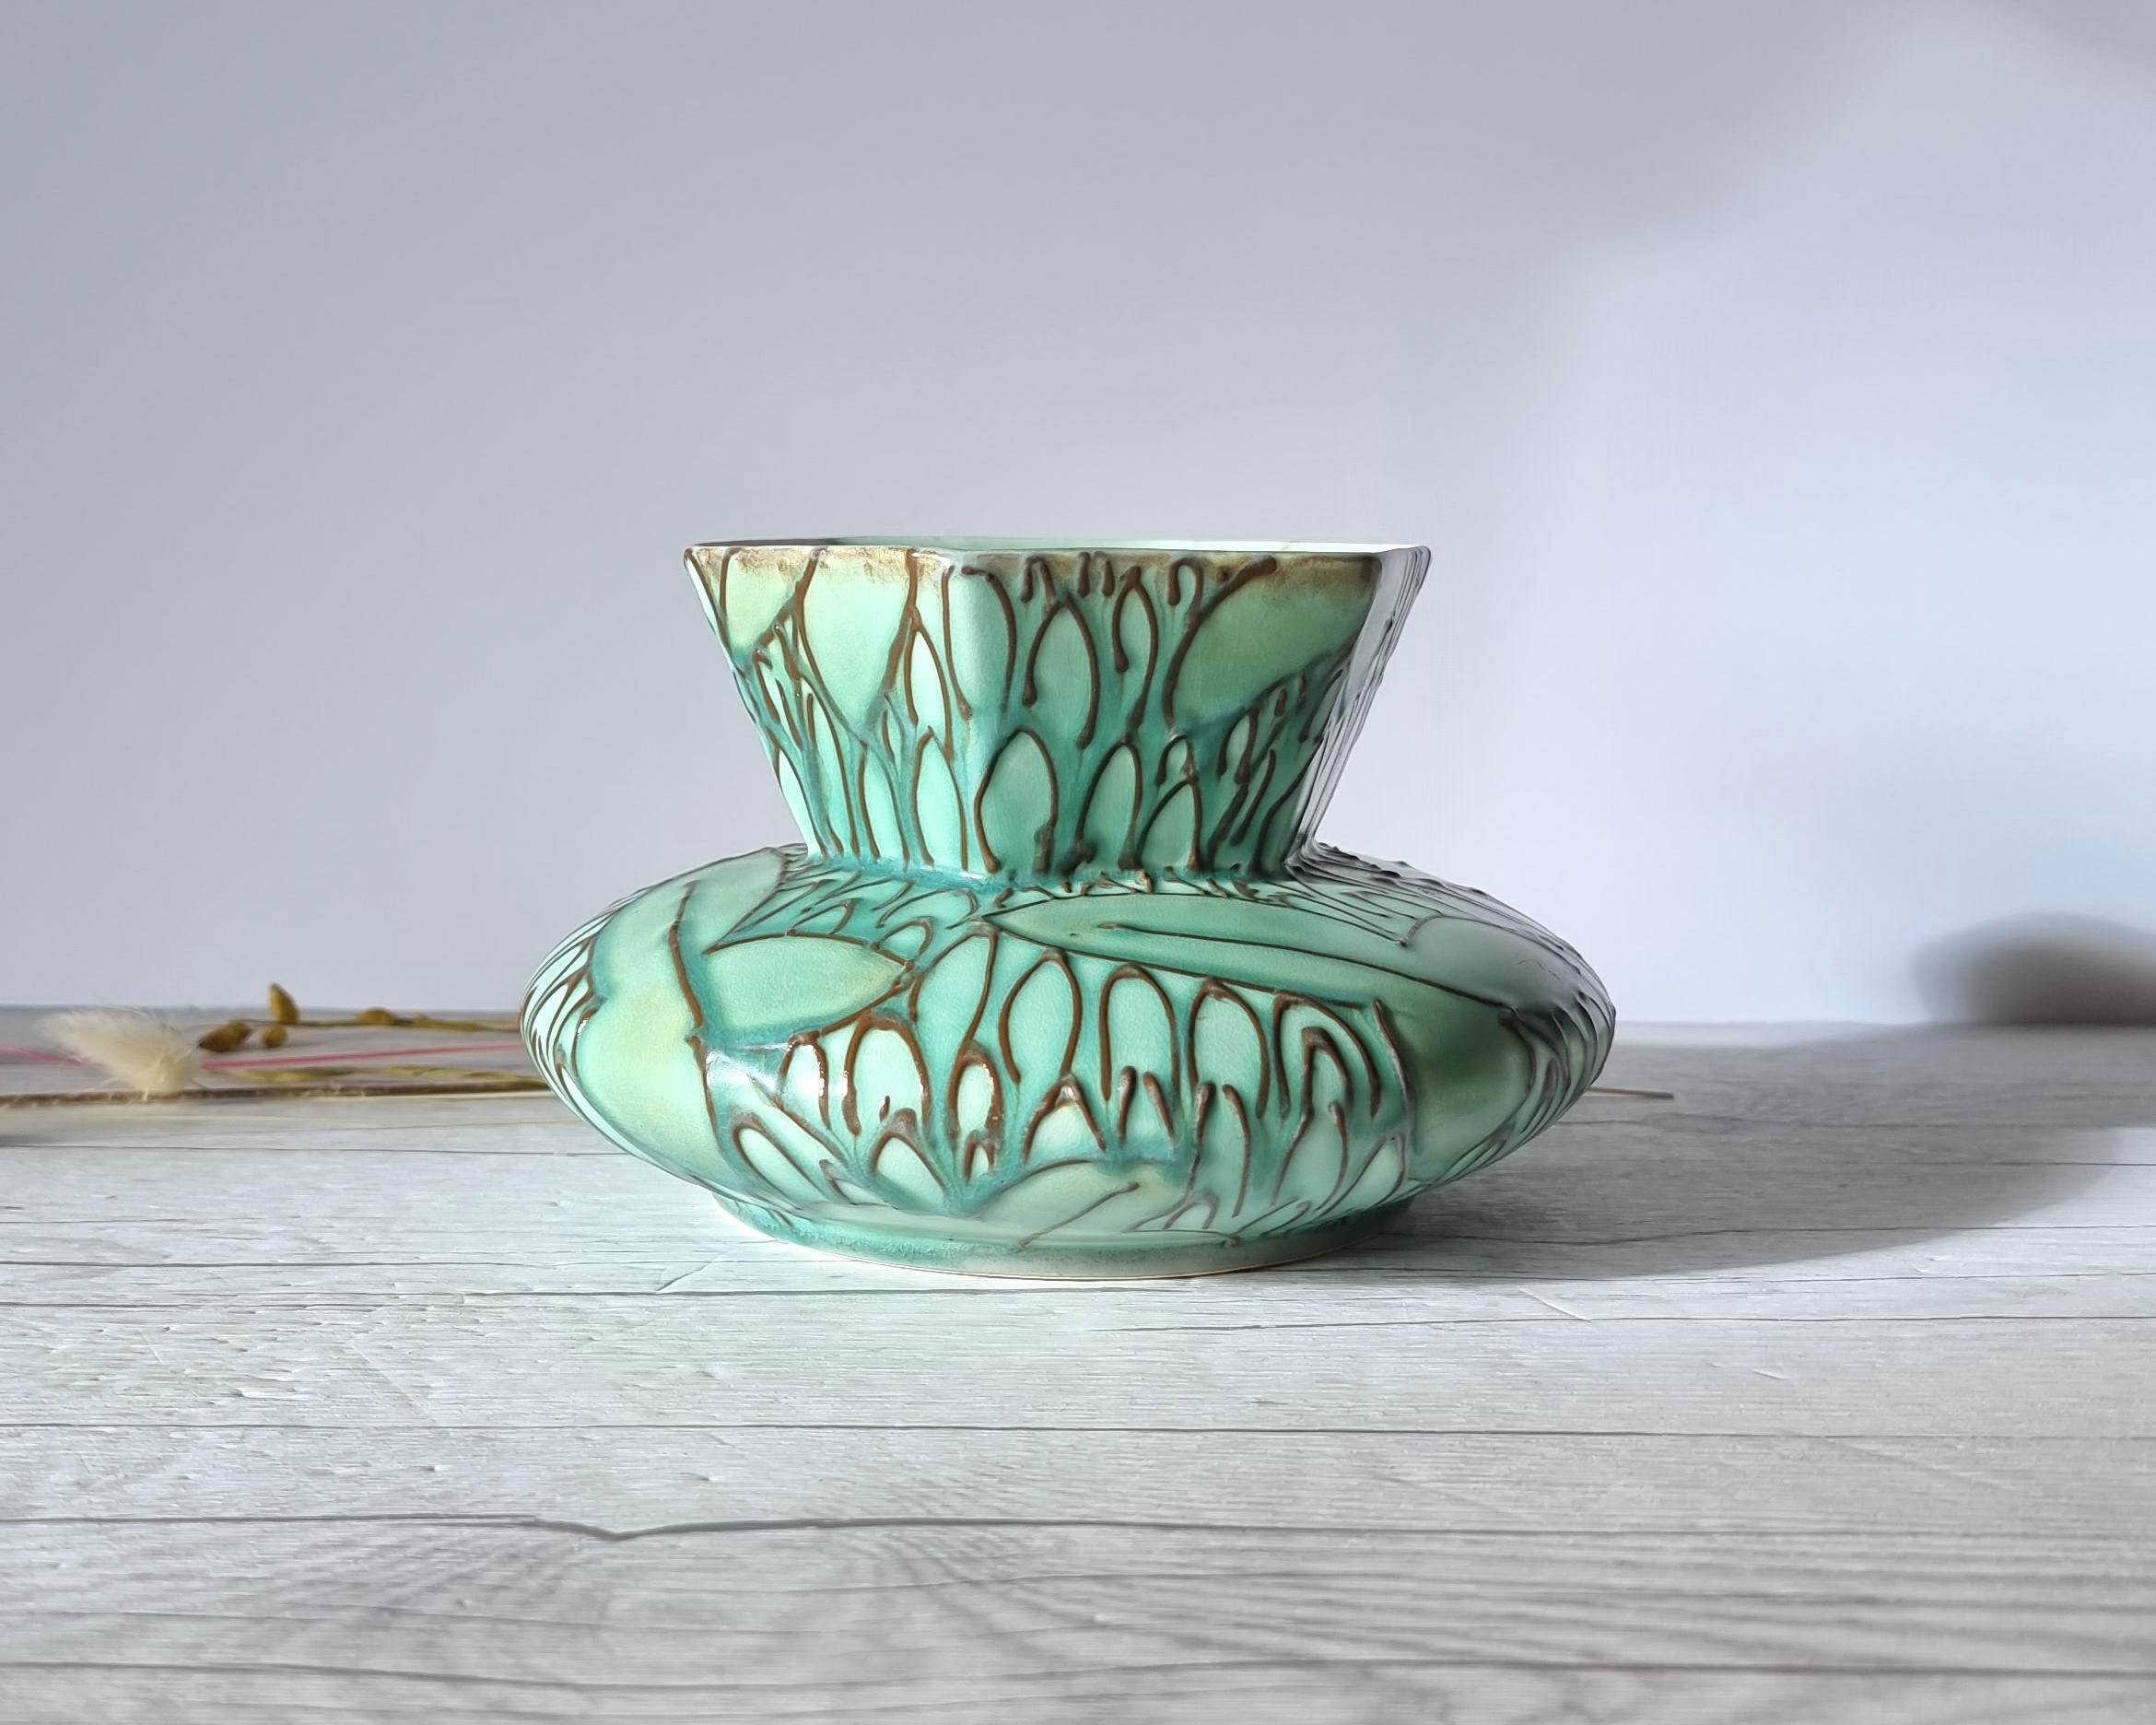 This elegant work of Art Deco design is by British pottery Phoenix Works (e. 1879 - d.1956) that was founded by Thomas Forester in 1879. The pottery famously received an order for 8,000 pieces, the largest order (in 1881) ever to be given to a